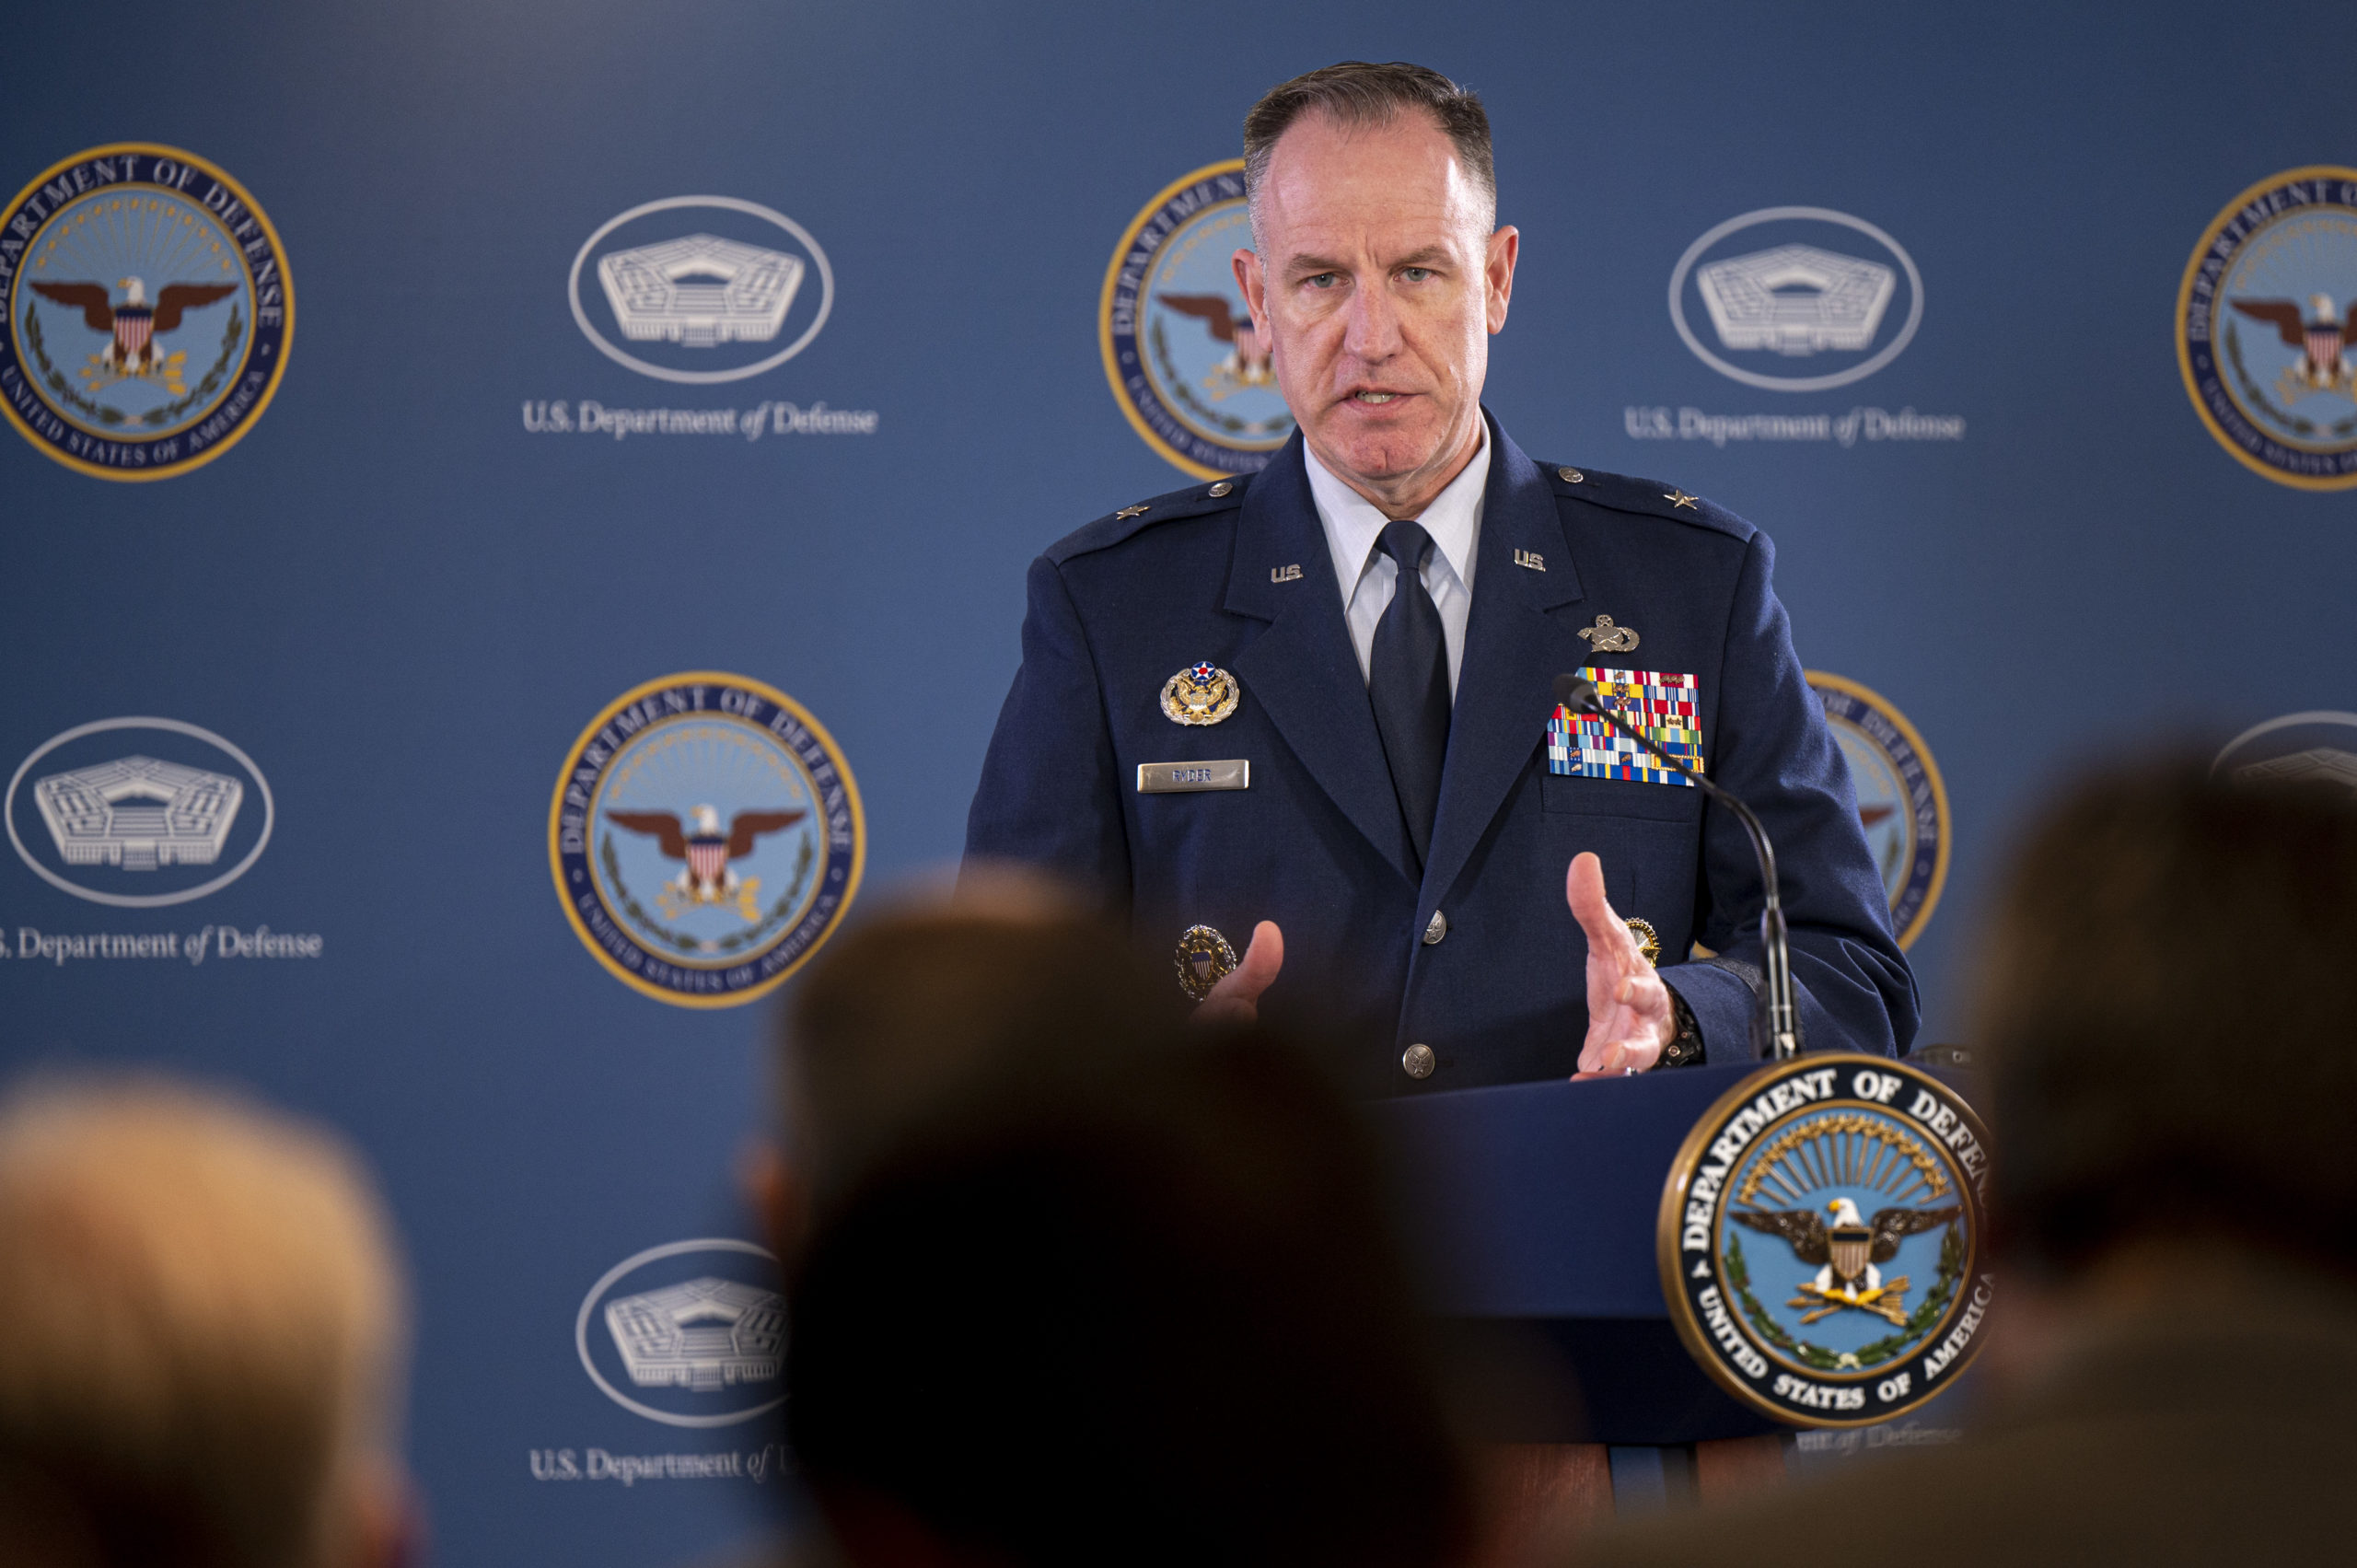 DOD Press Chief, Fighter PEO, and 21 More Selected for 2-Star General